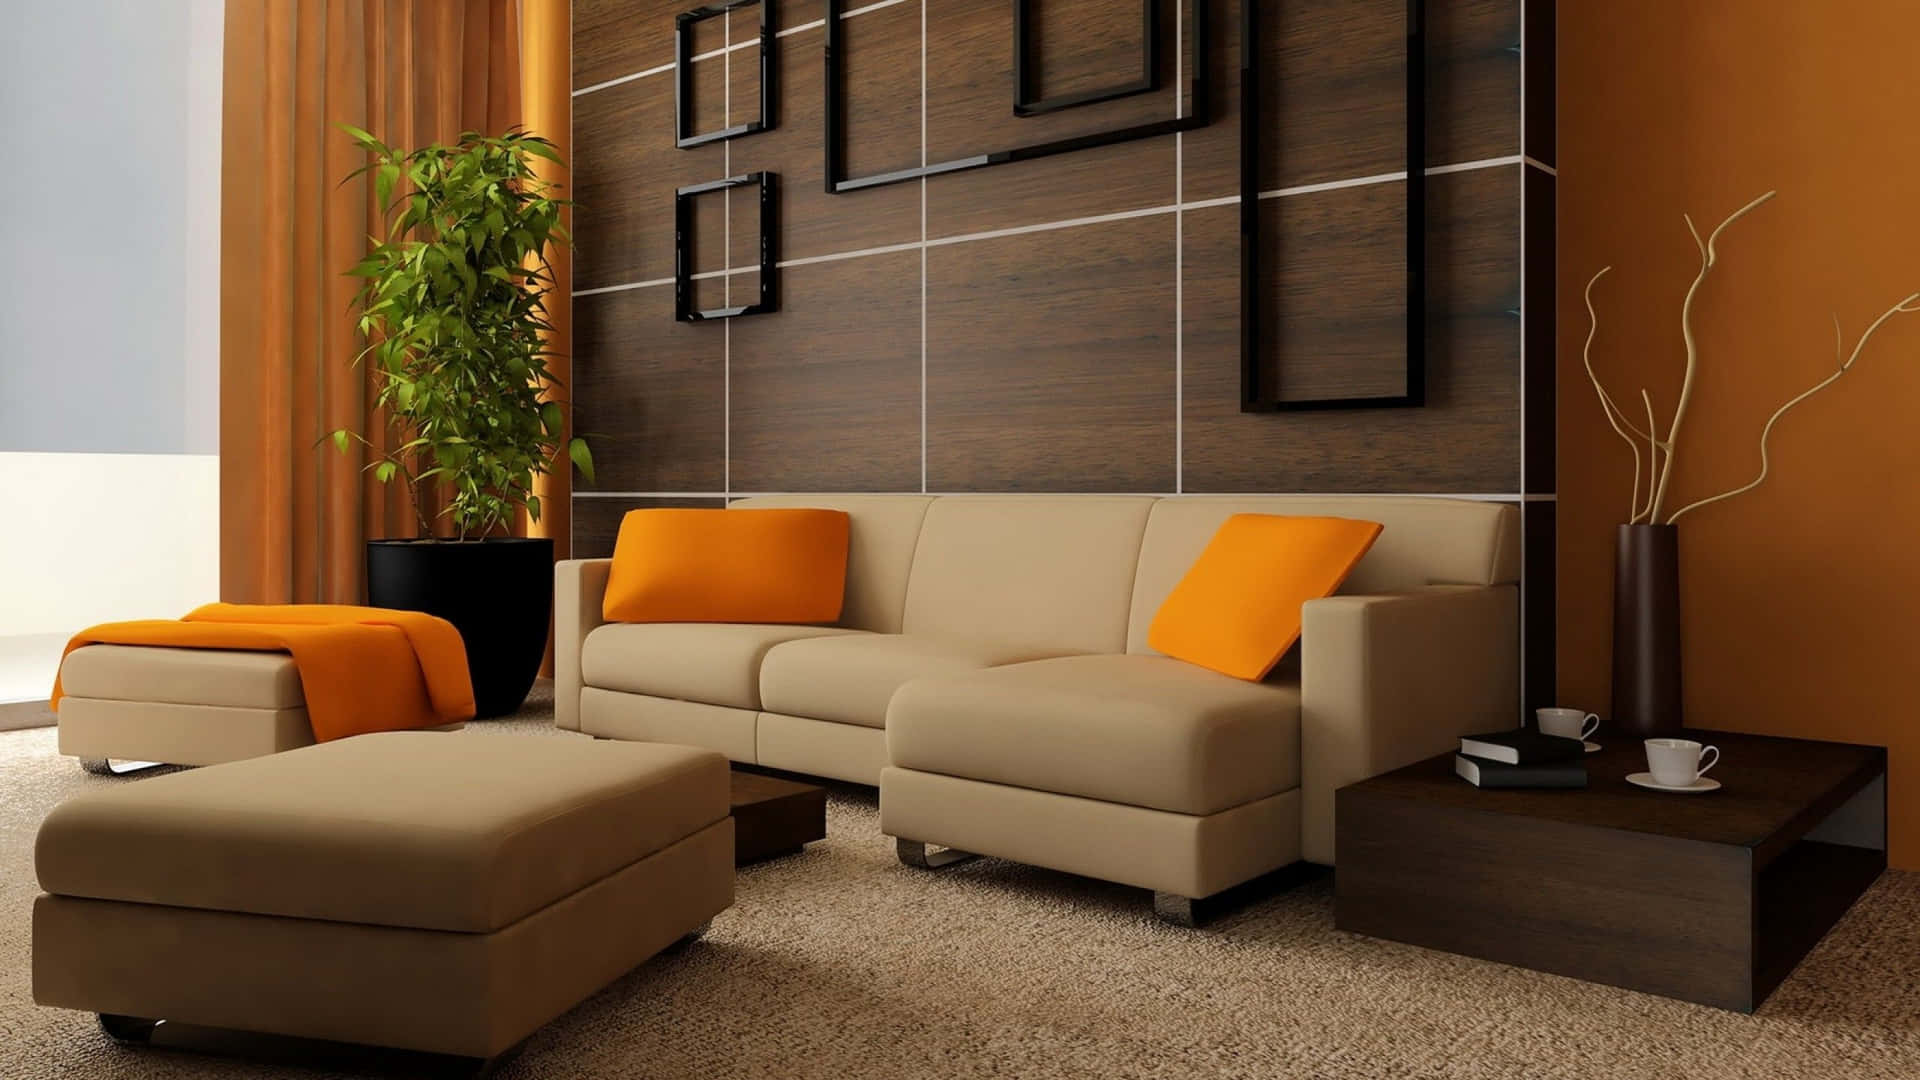 Brown Couch Against Geometry Walls Wallpaper